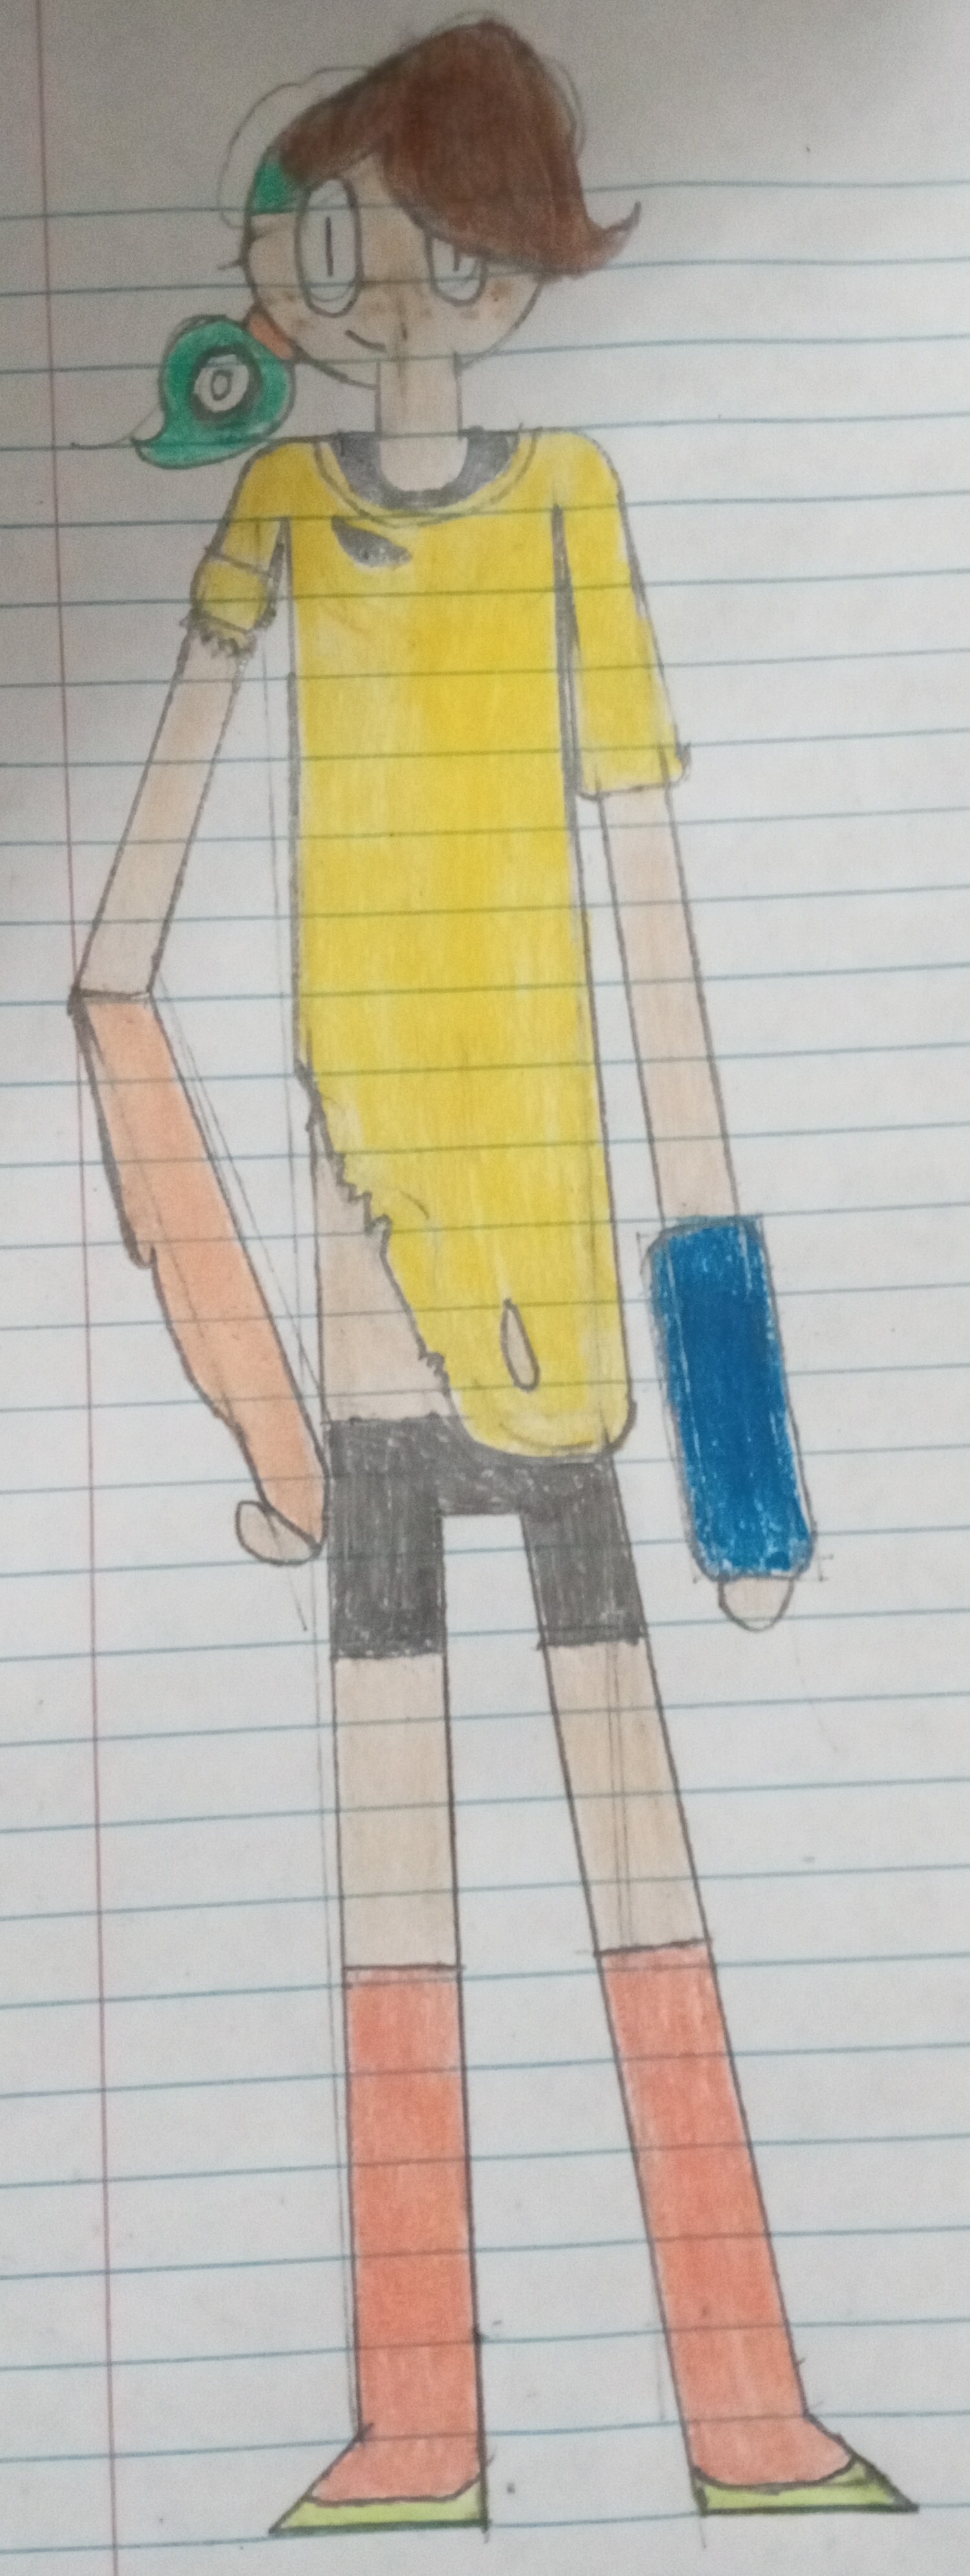 My drawing of Human Y